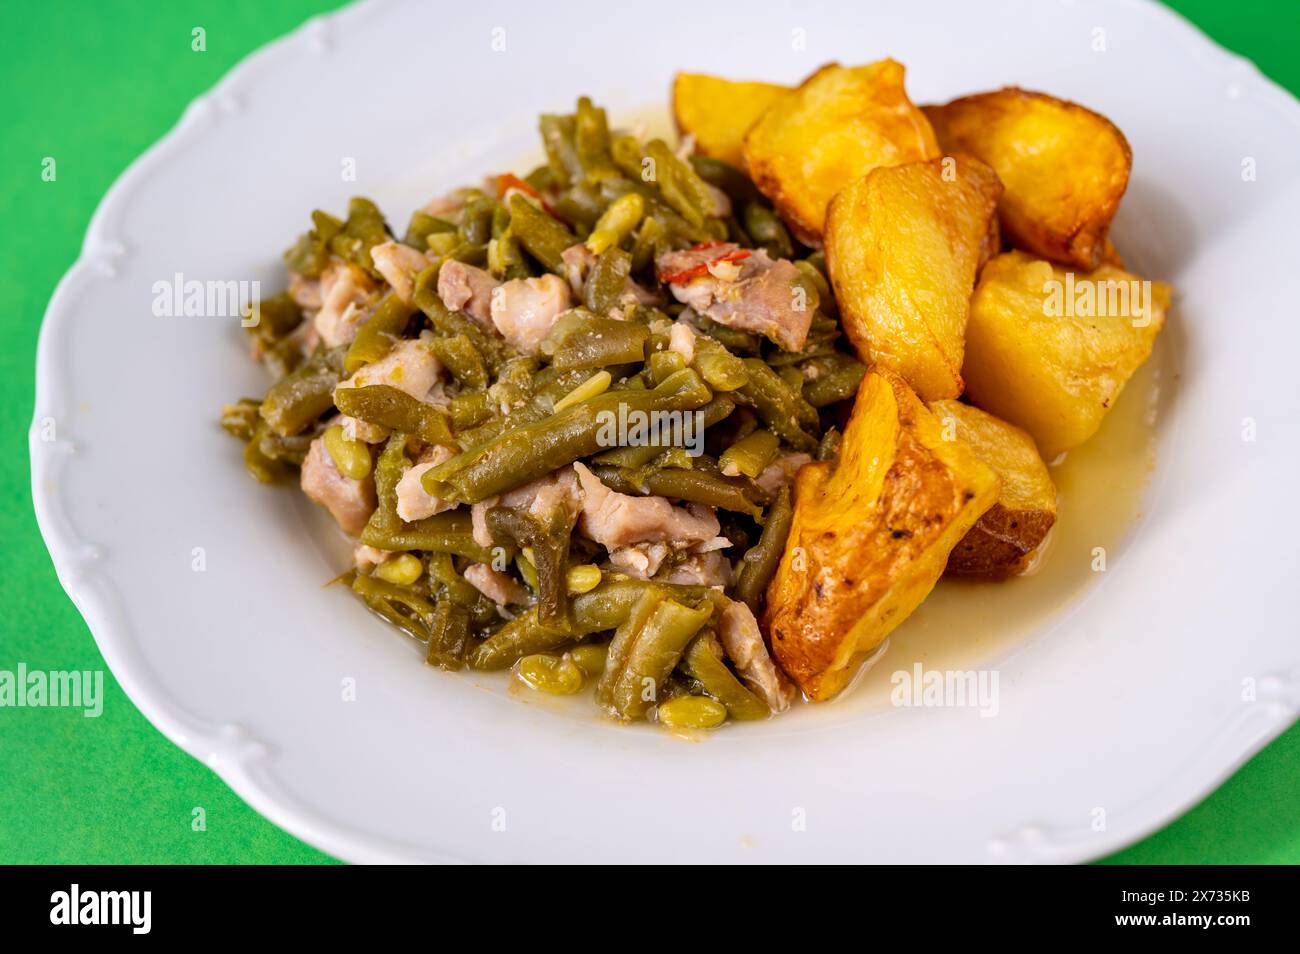 Green beans with tuna fish piece and baked potato on white plate on green background, closeup. Stock Photo